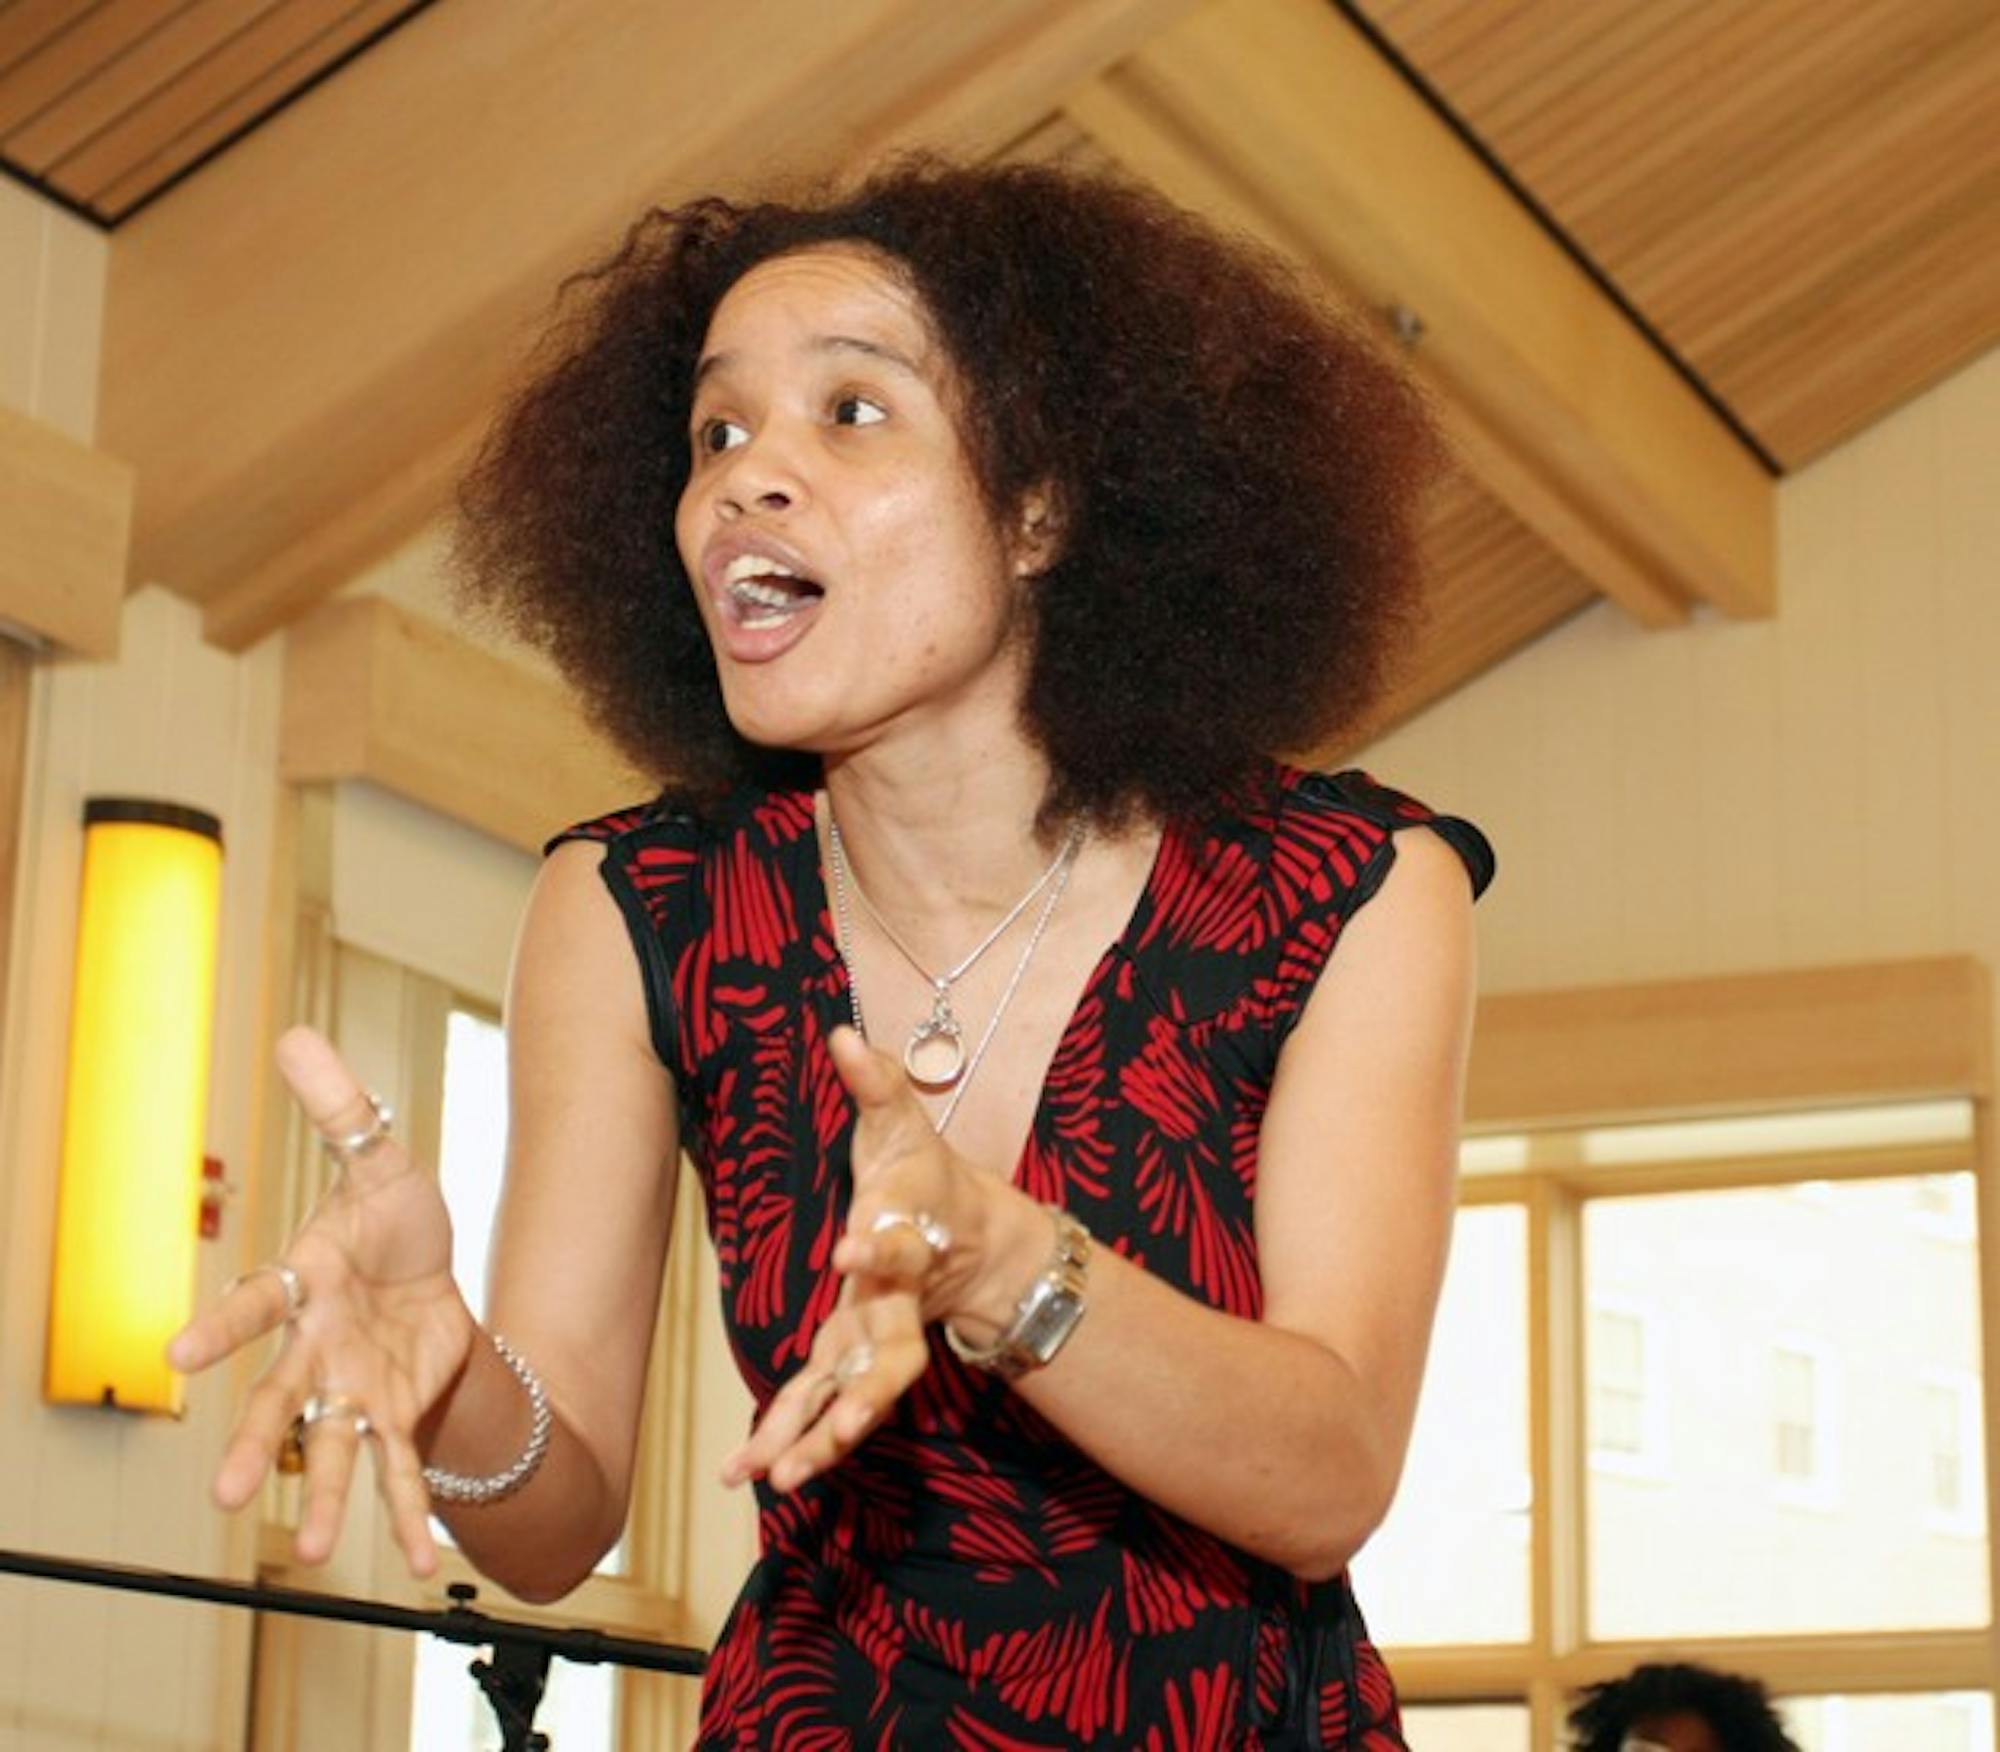 Staceyann Chin, the Center for Women and Gender's eighth annual Visionary in Residence, met with students at a dinner Wednesday.